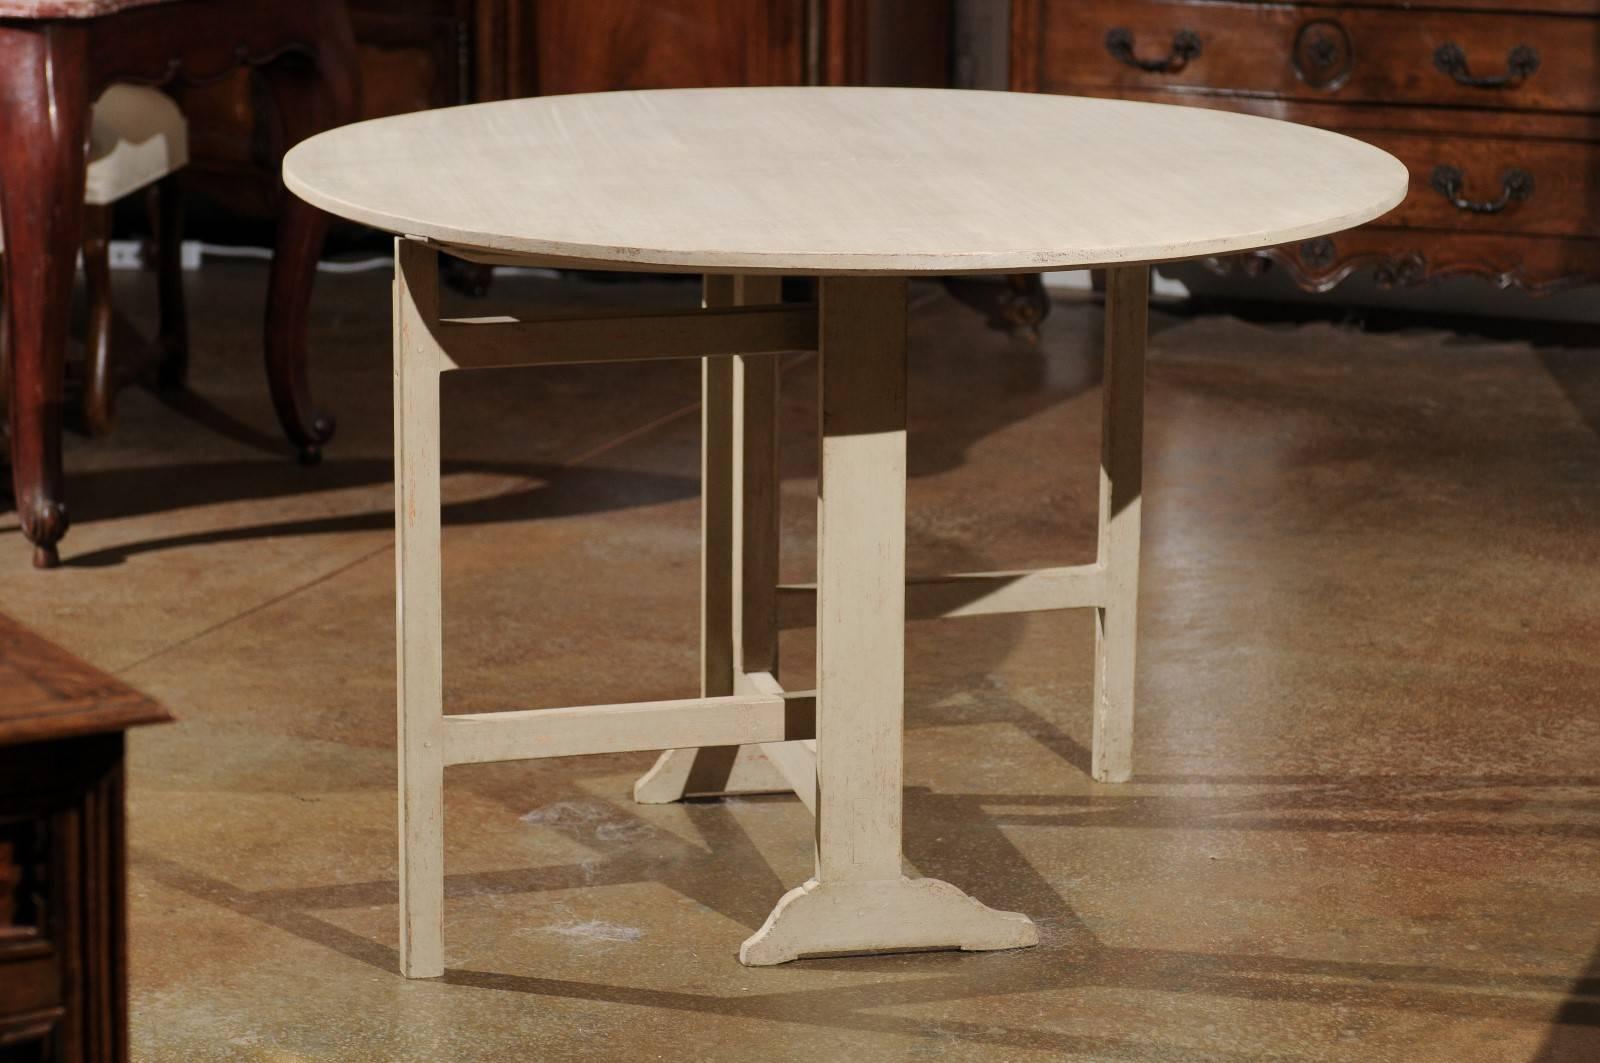 A Swedish painted round wine tasting gateleg table from the late 19th century. This Swedish centre table, circa 1890 features a circular top over an H-form trestle base with gateleg support. Painted in a light color, the table, with its Scandinavian